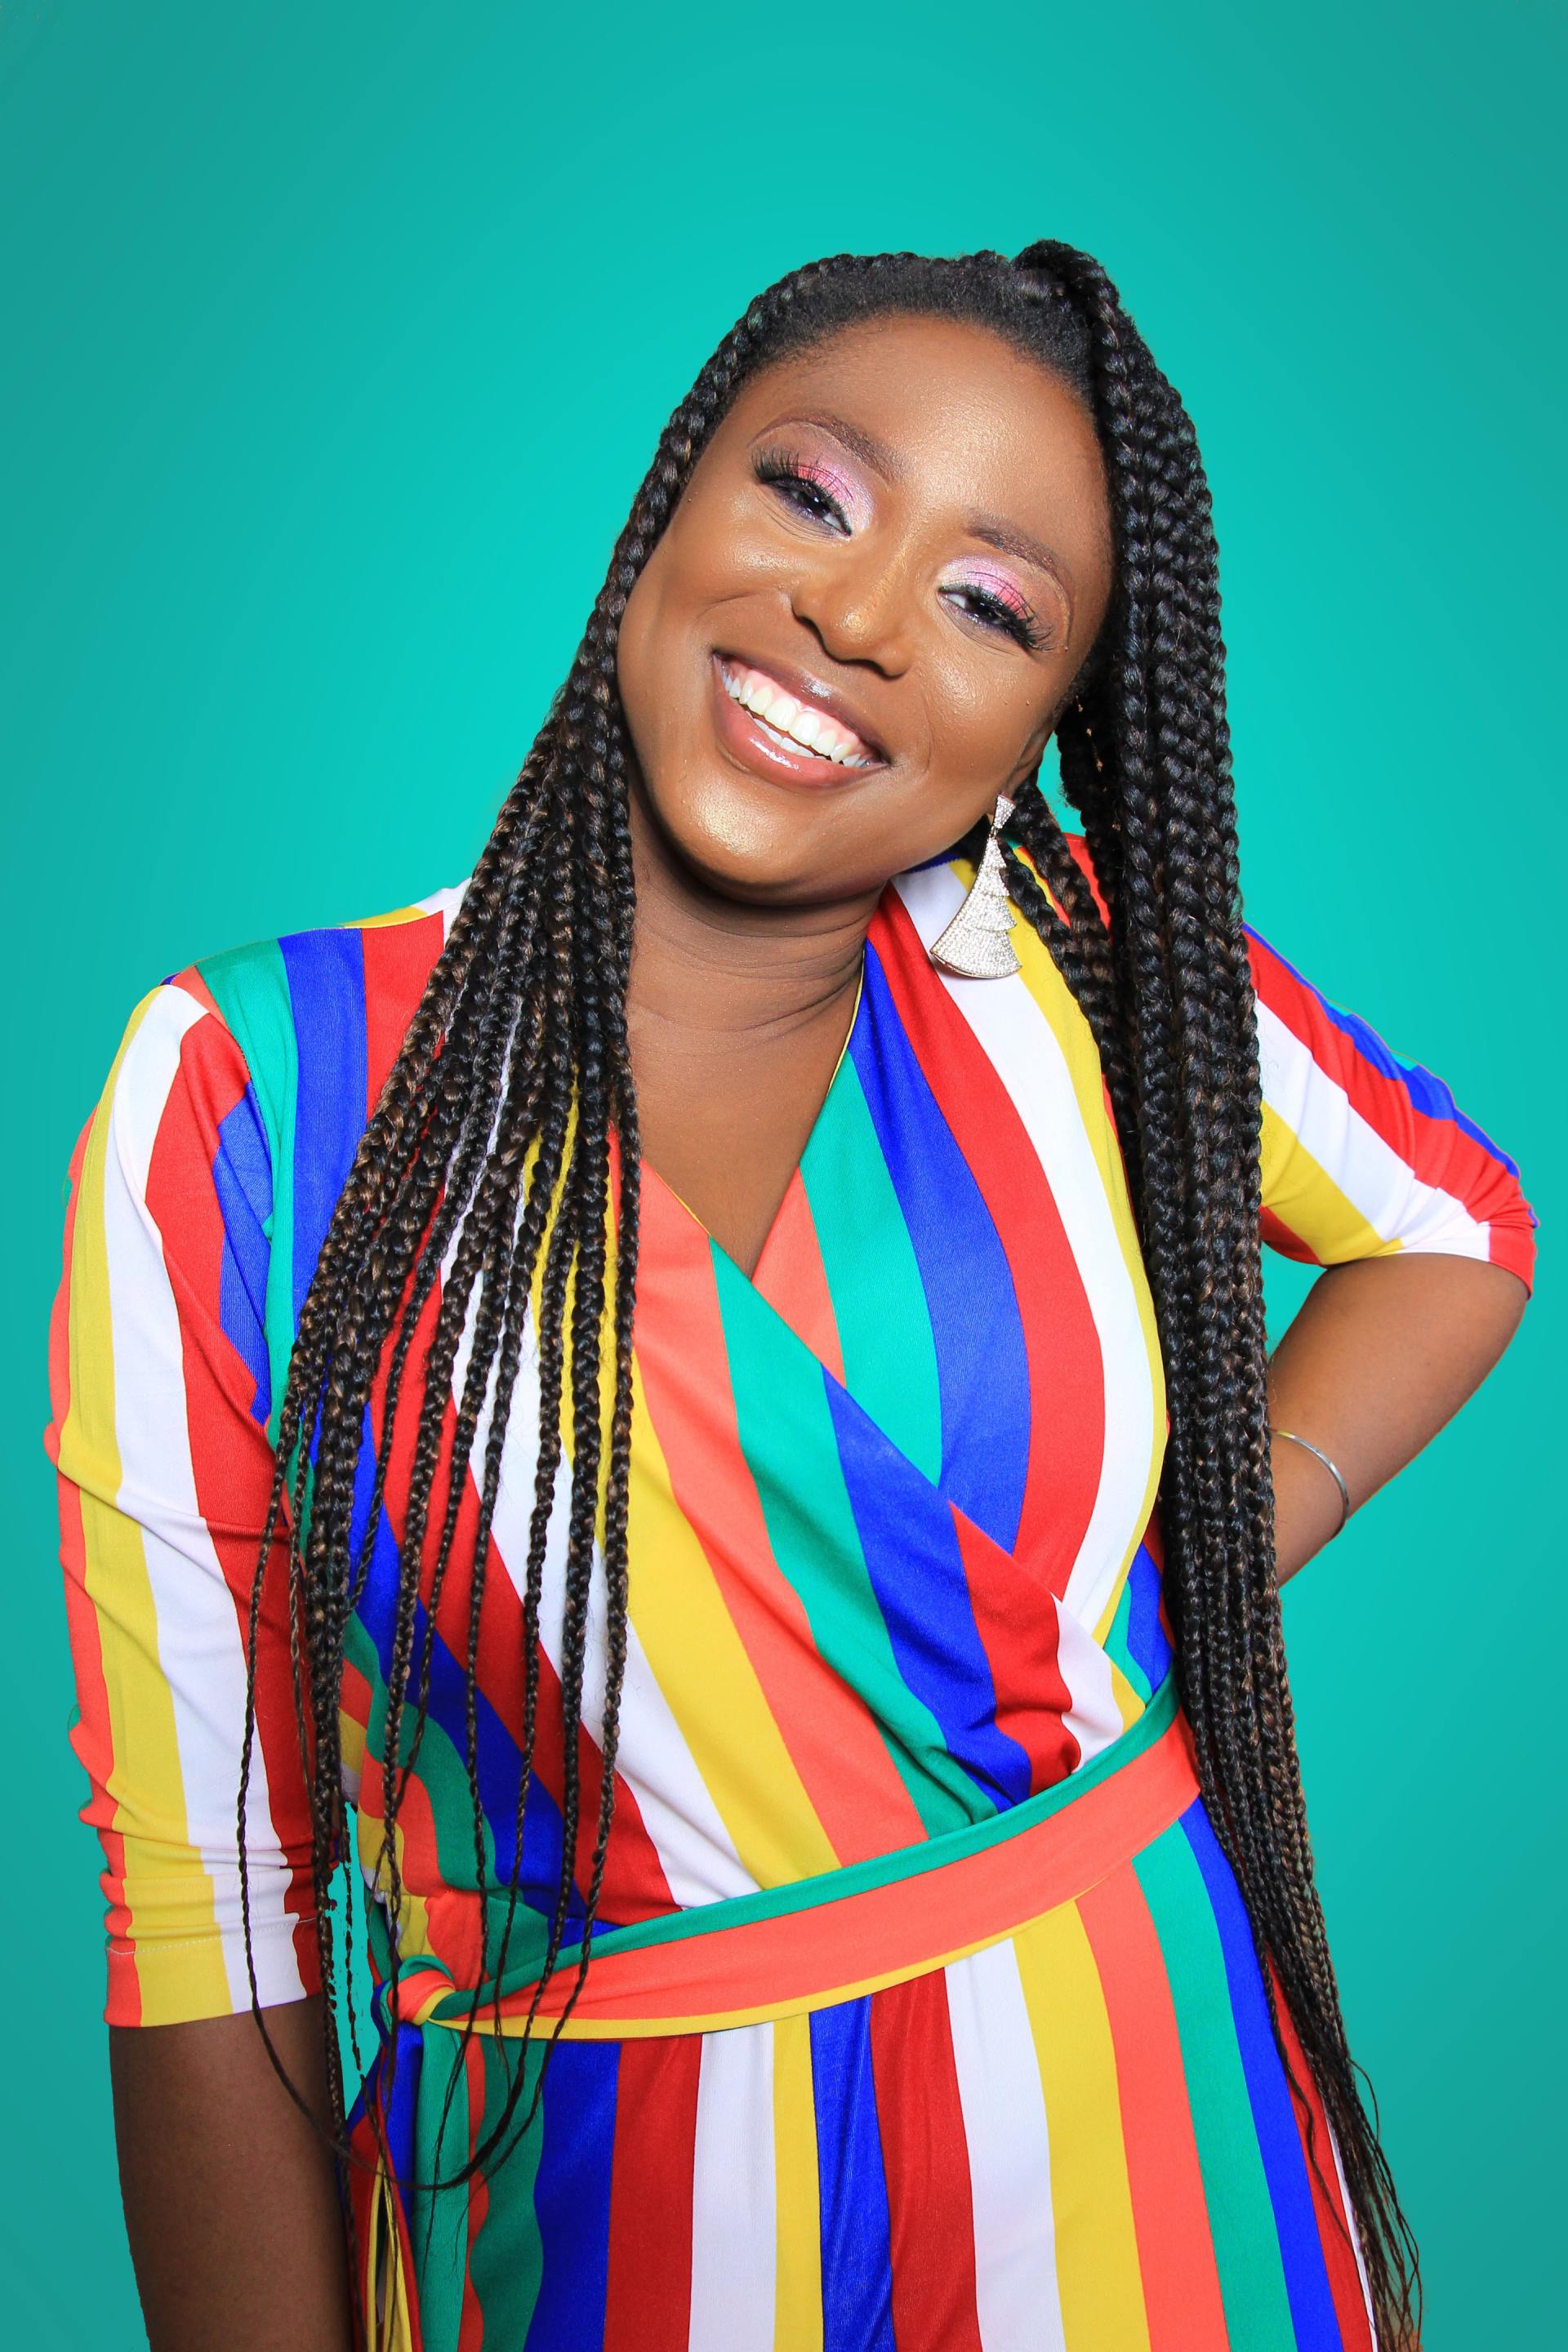 a woman wearing a colorful striped dress smiles for the camera